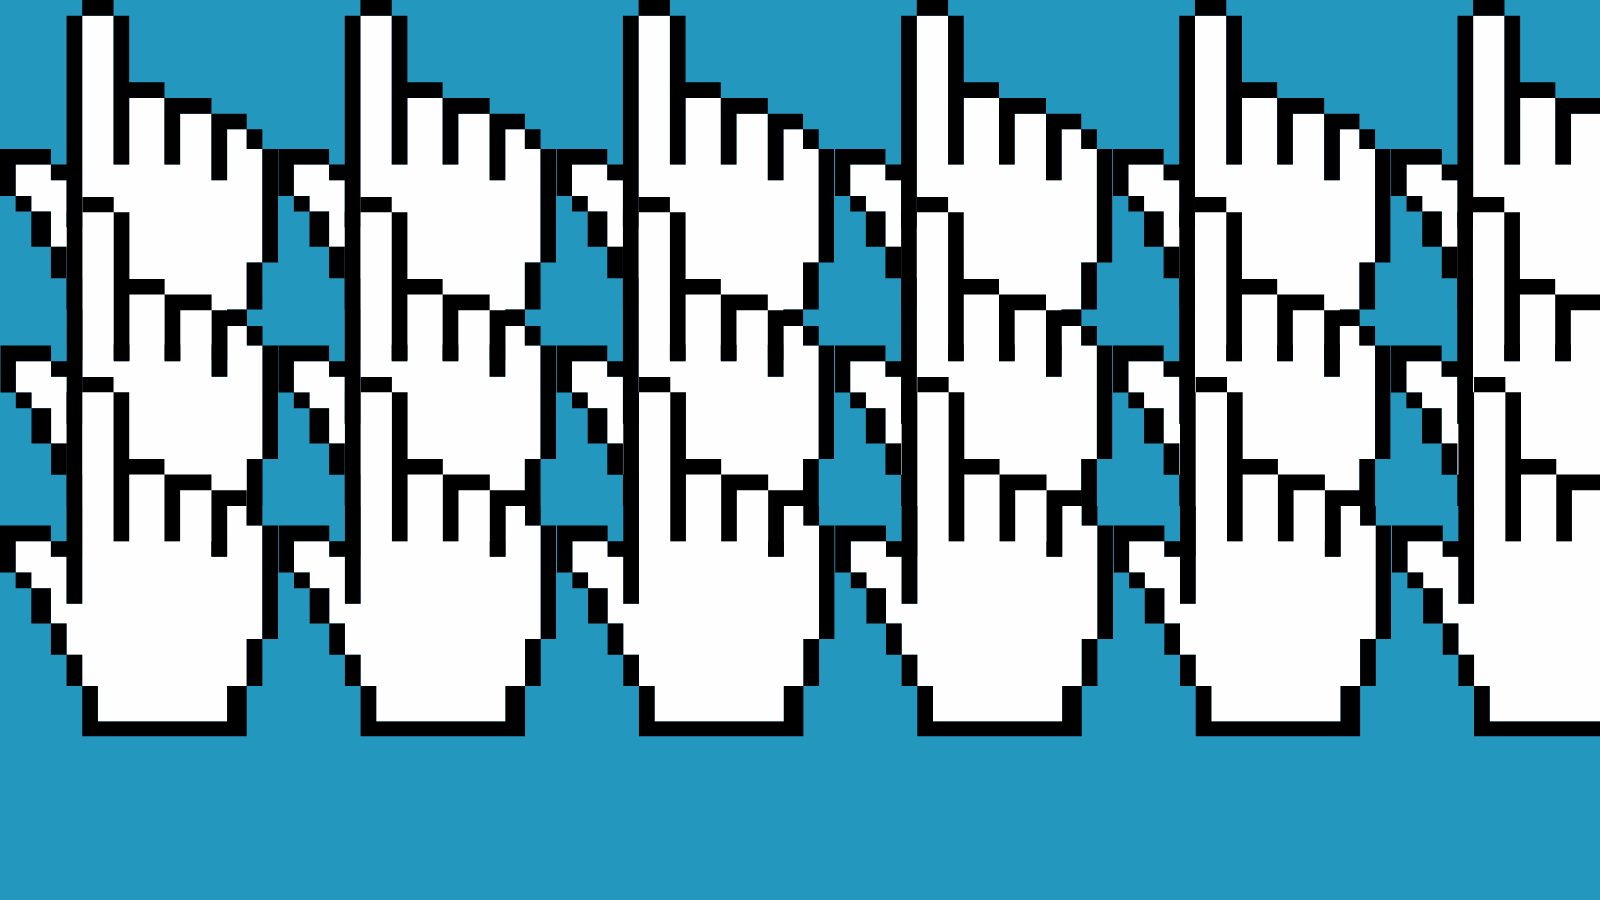 A repeating pattern of pointing hand cursors